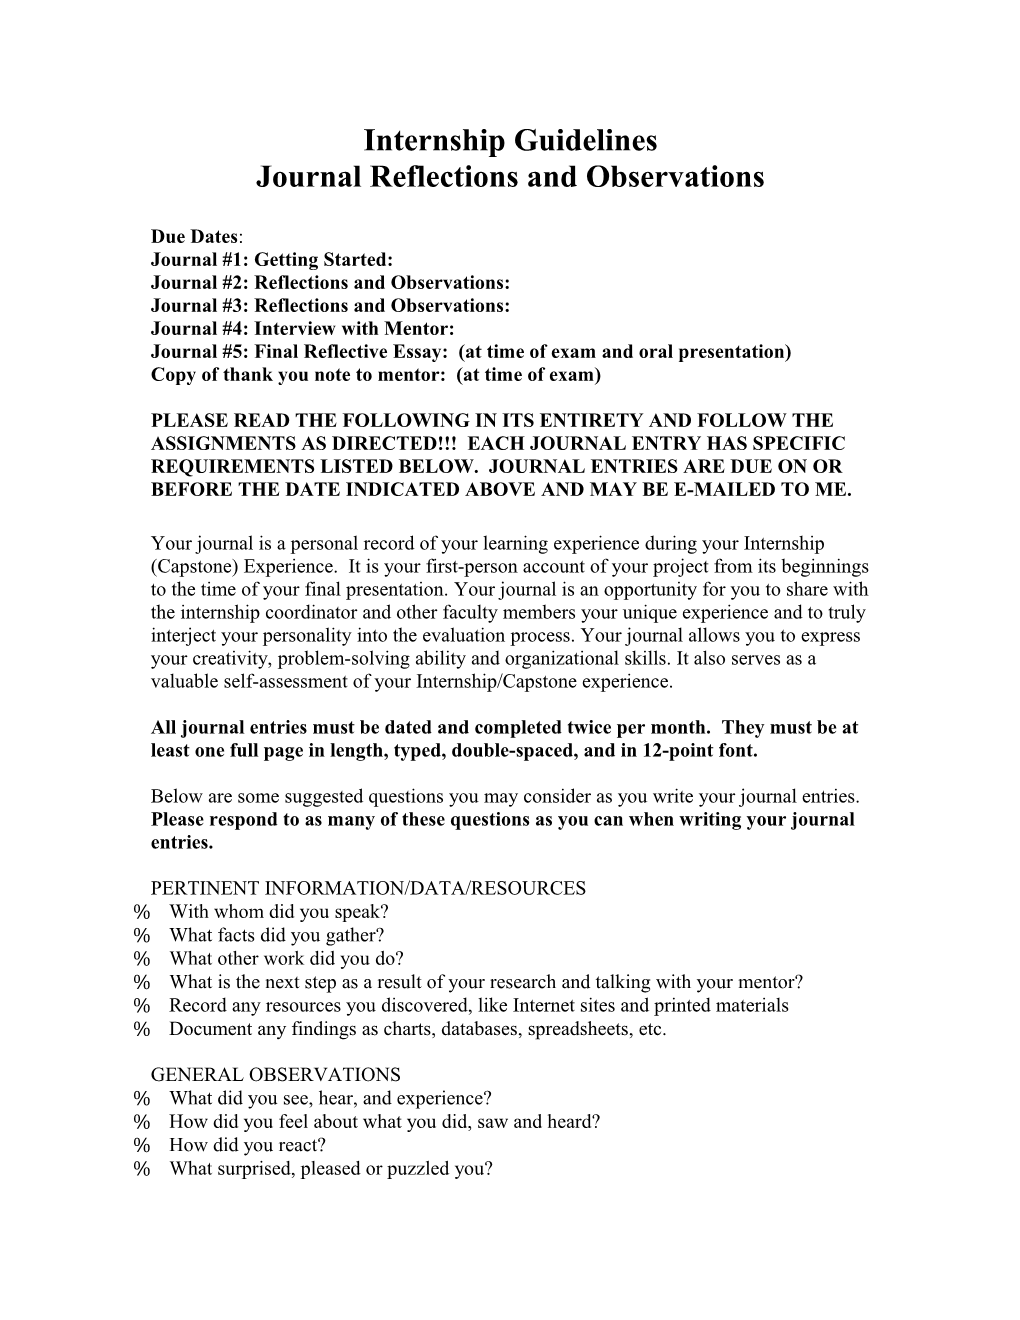 Journal Reflections and Observations